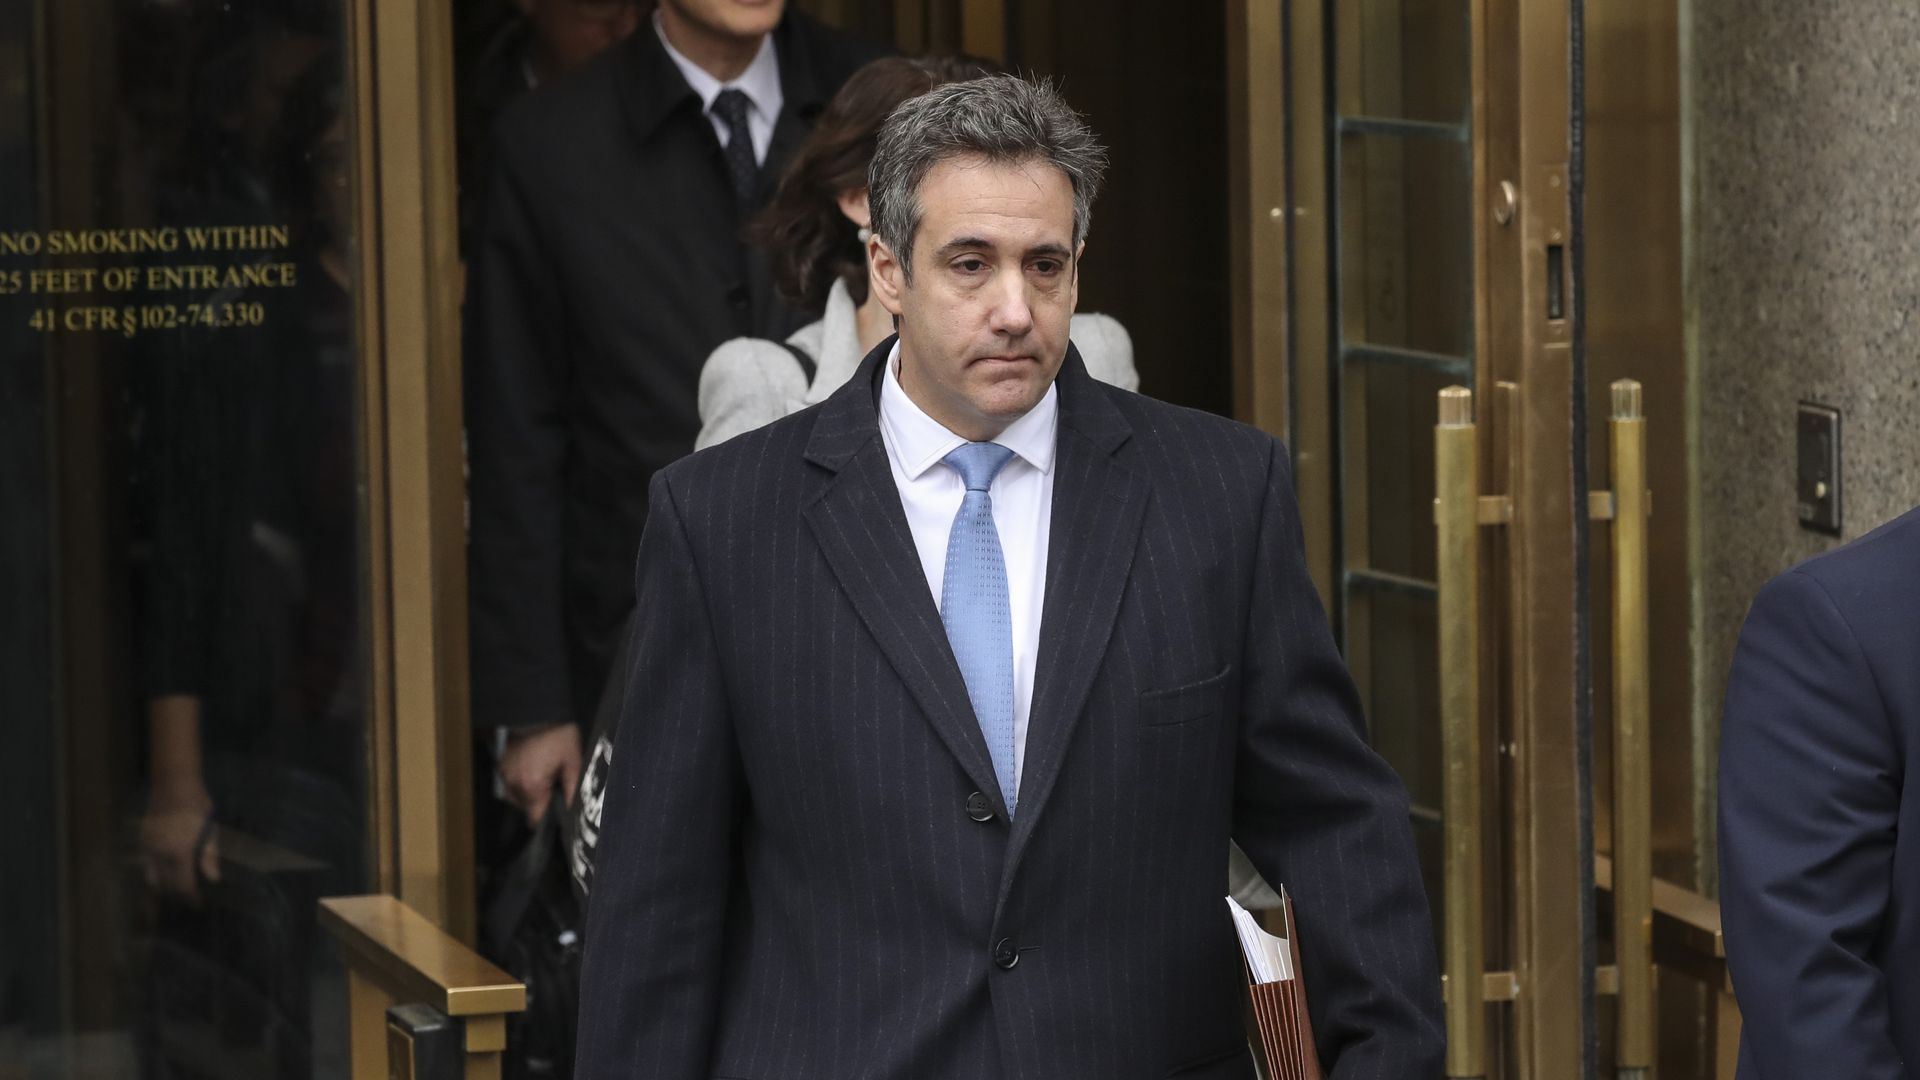 Michael Cohen walks out of a courthouse